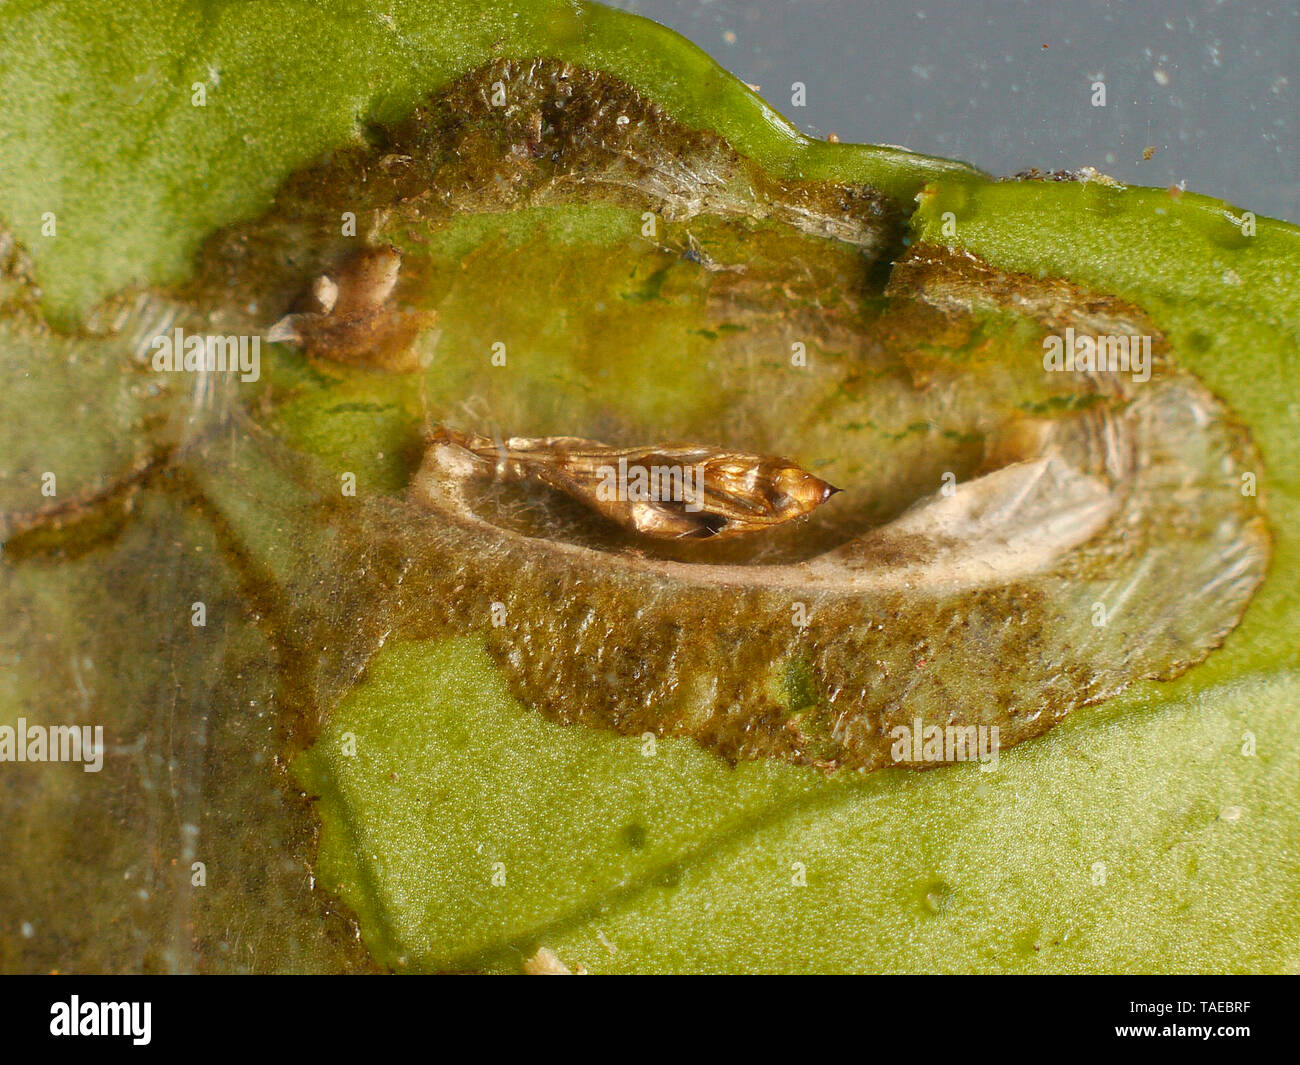 Gallery in a lemon tree leaf, with empty nymph of the citrus leafminer (Phyllocnistis citrella) that emerged. Stock Photo